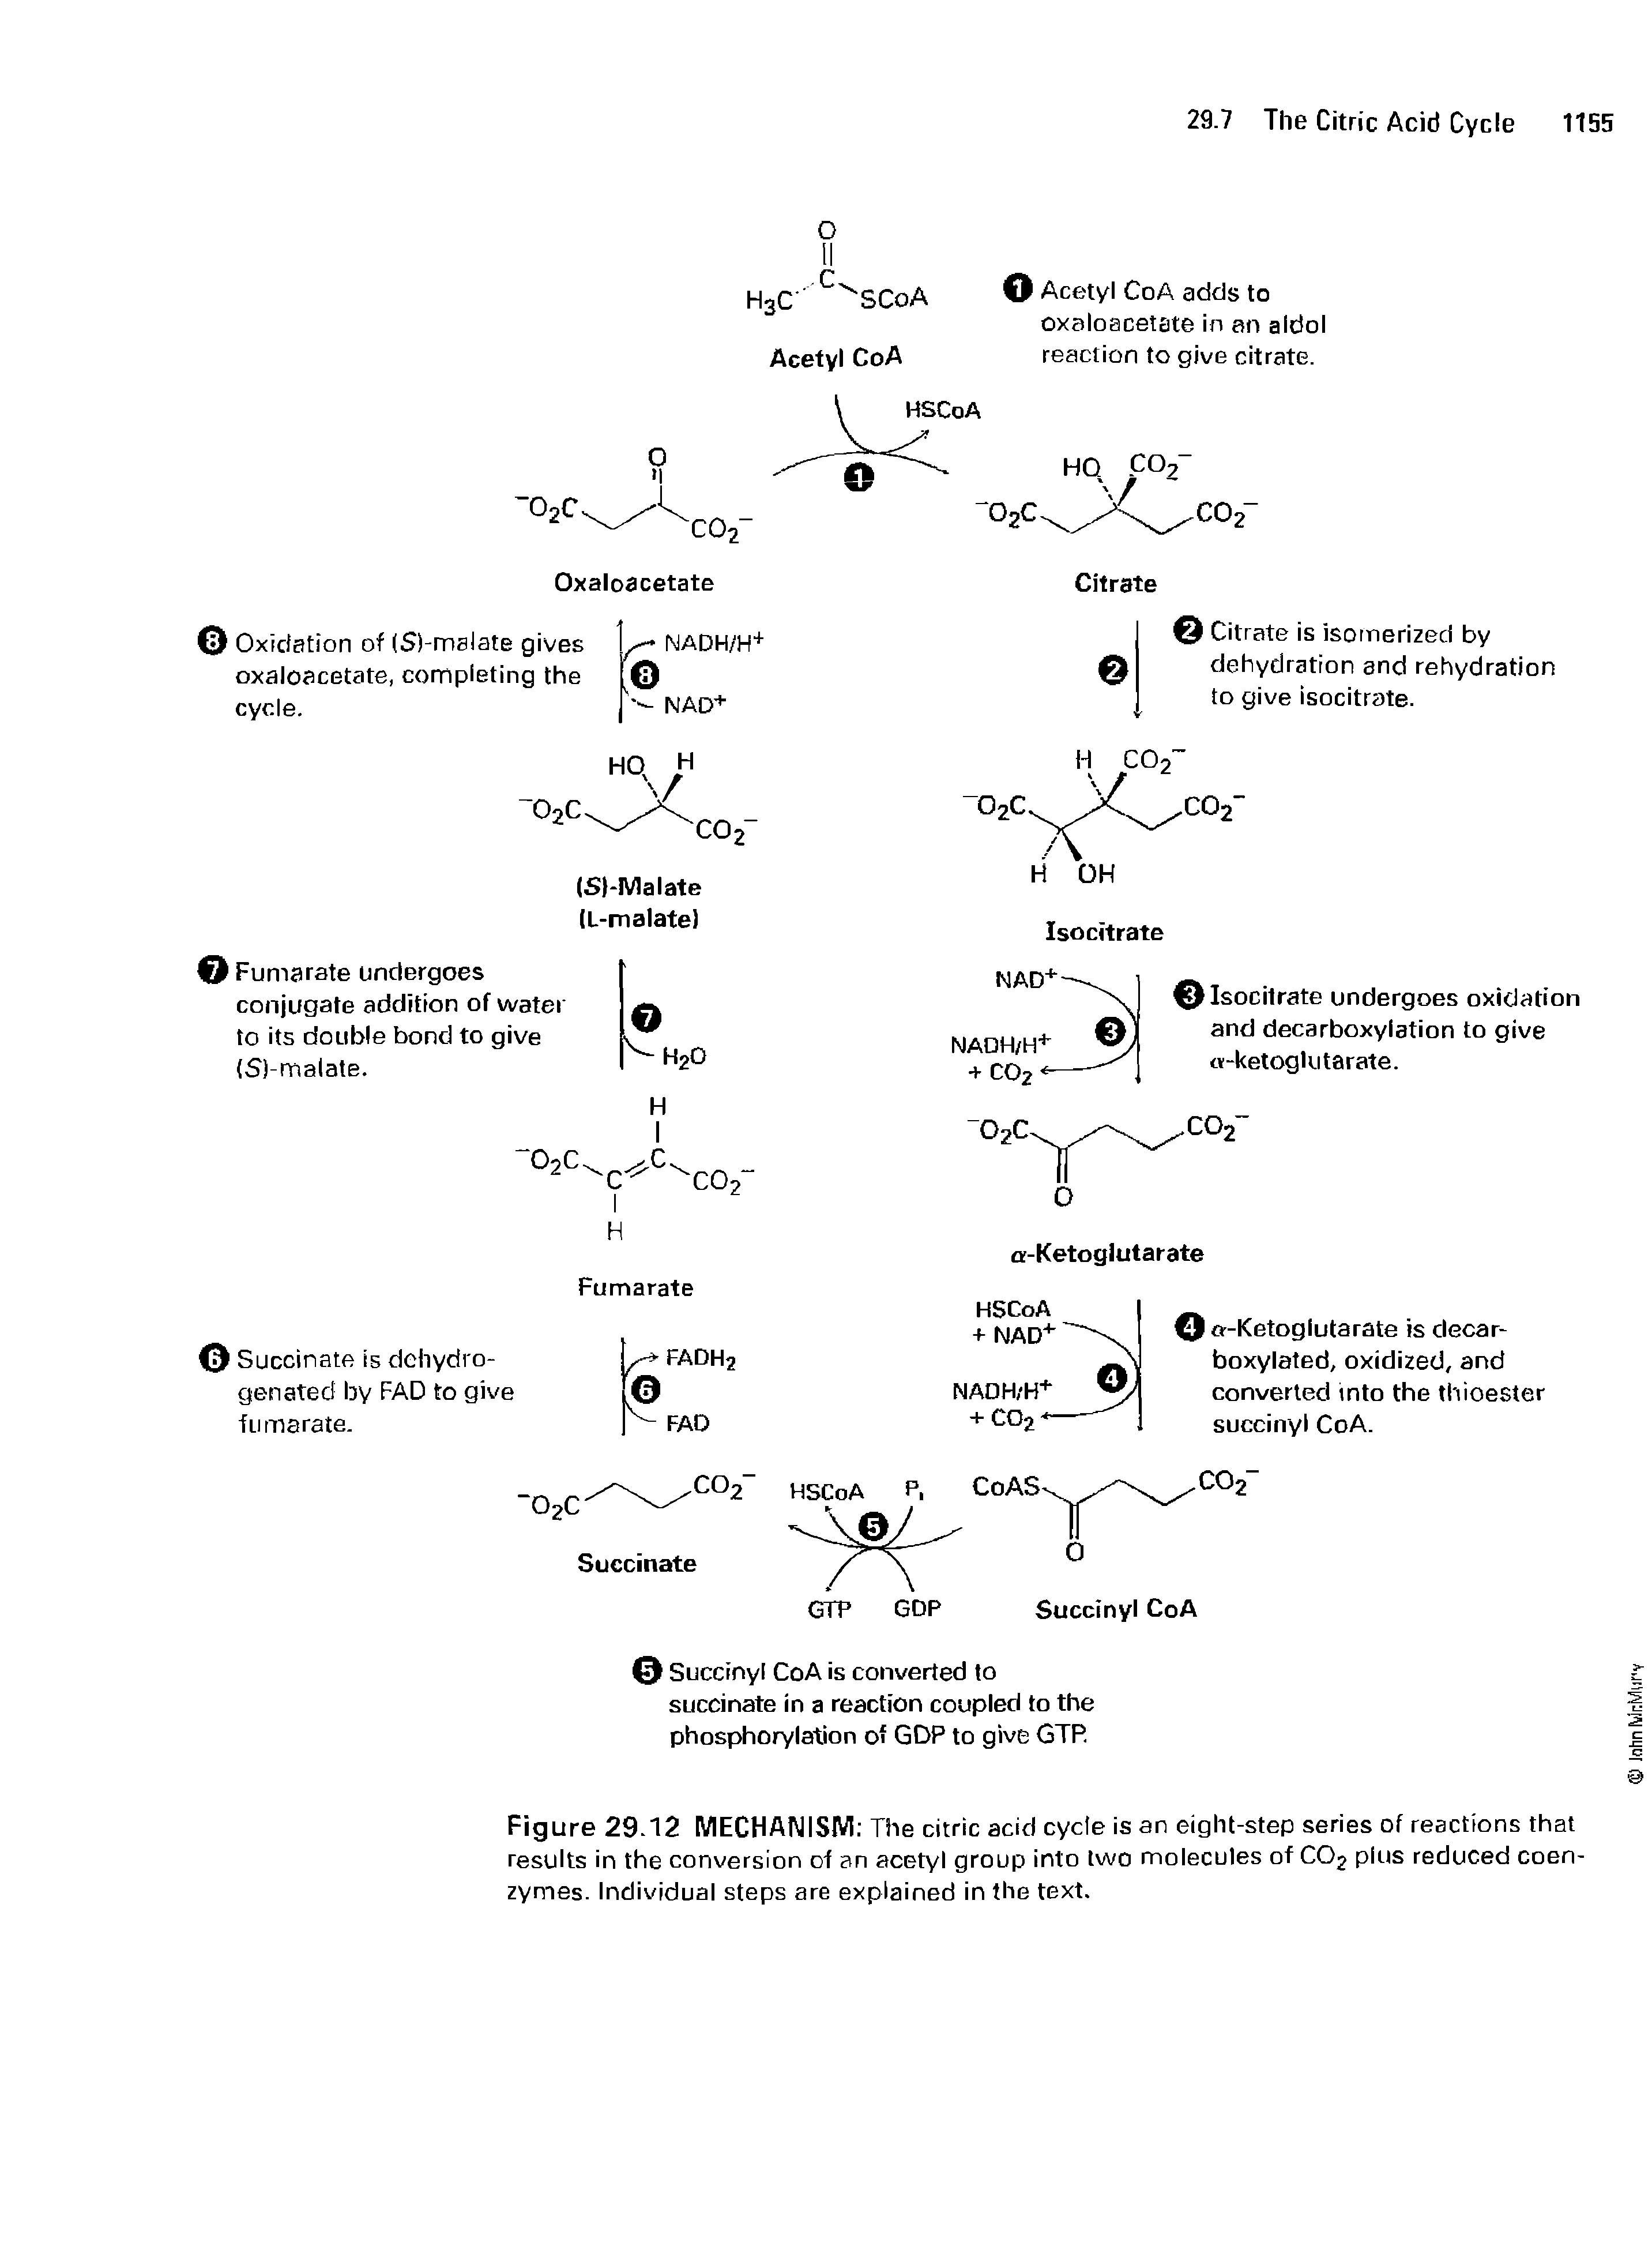 Figure 29.12 MECHANISM The citric acid cycle is an eight-step series of reactions that results in the conversion of an acetyl group into two molecules of C02 plus reduced coenzymes. Individual steps are explained in the text.